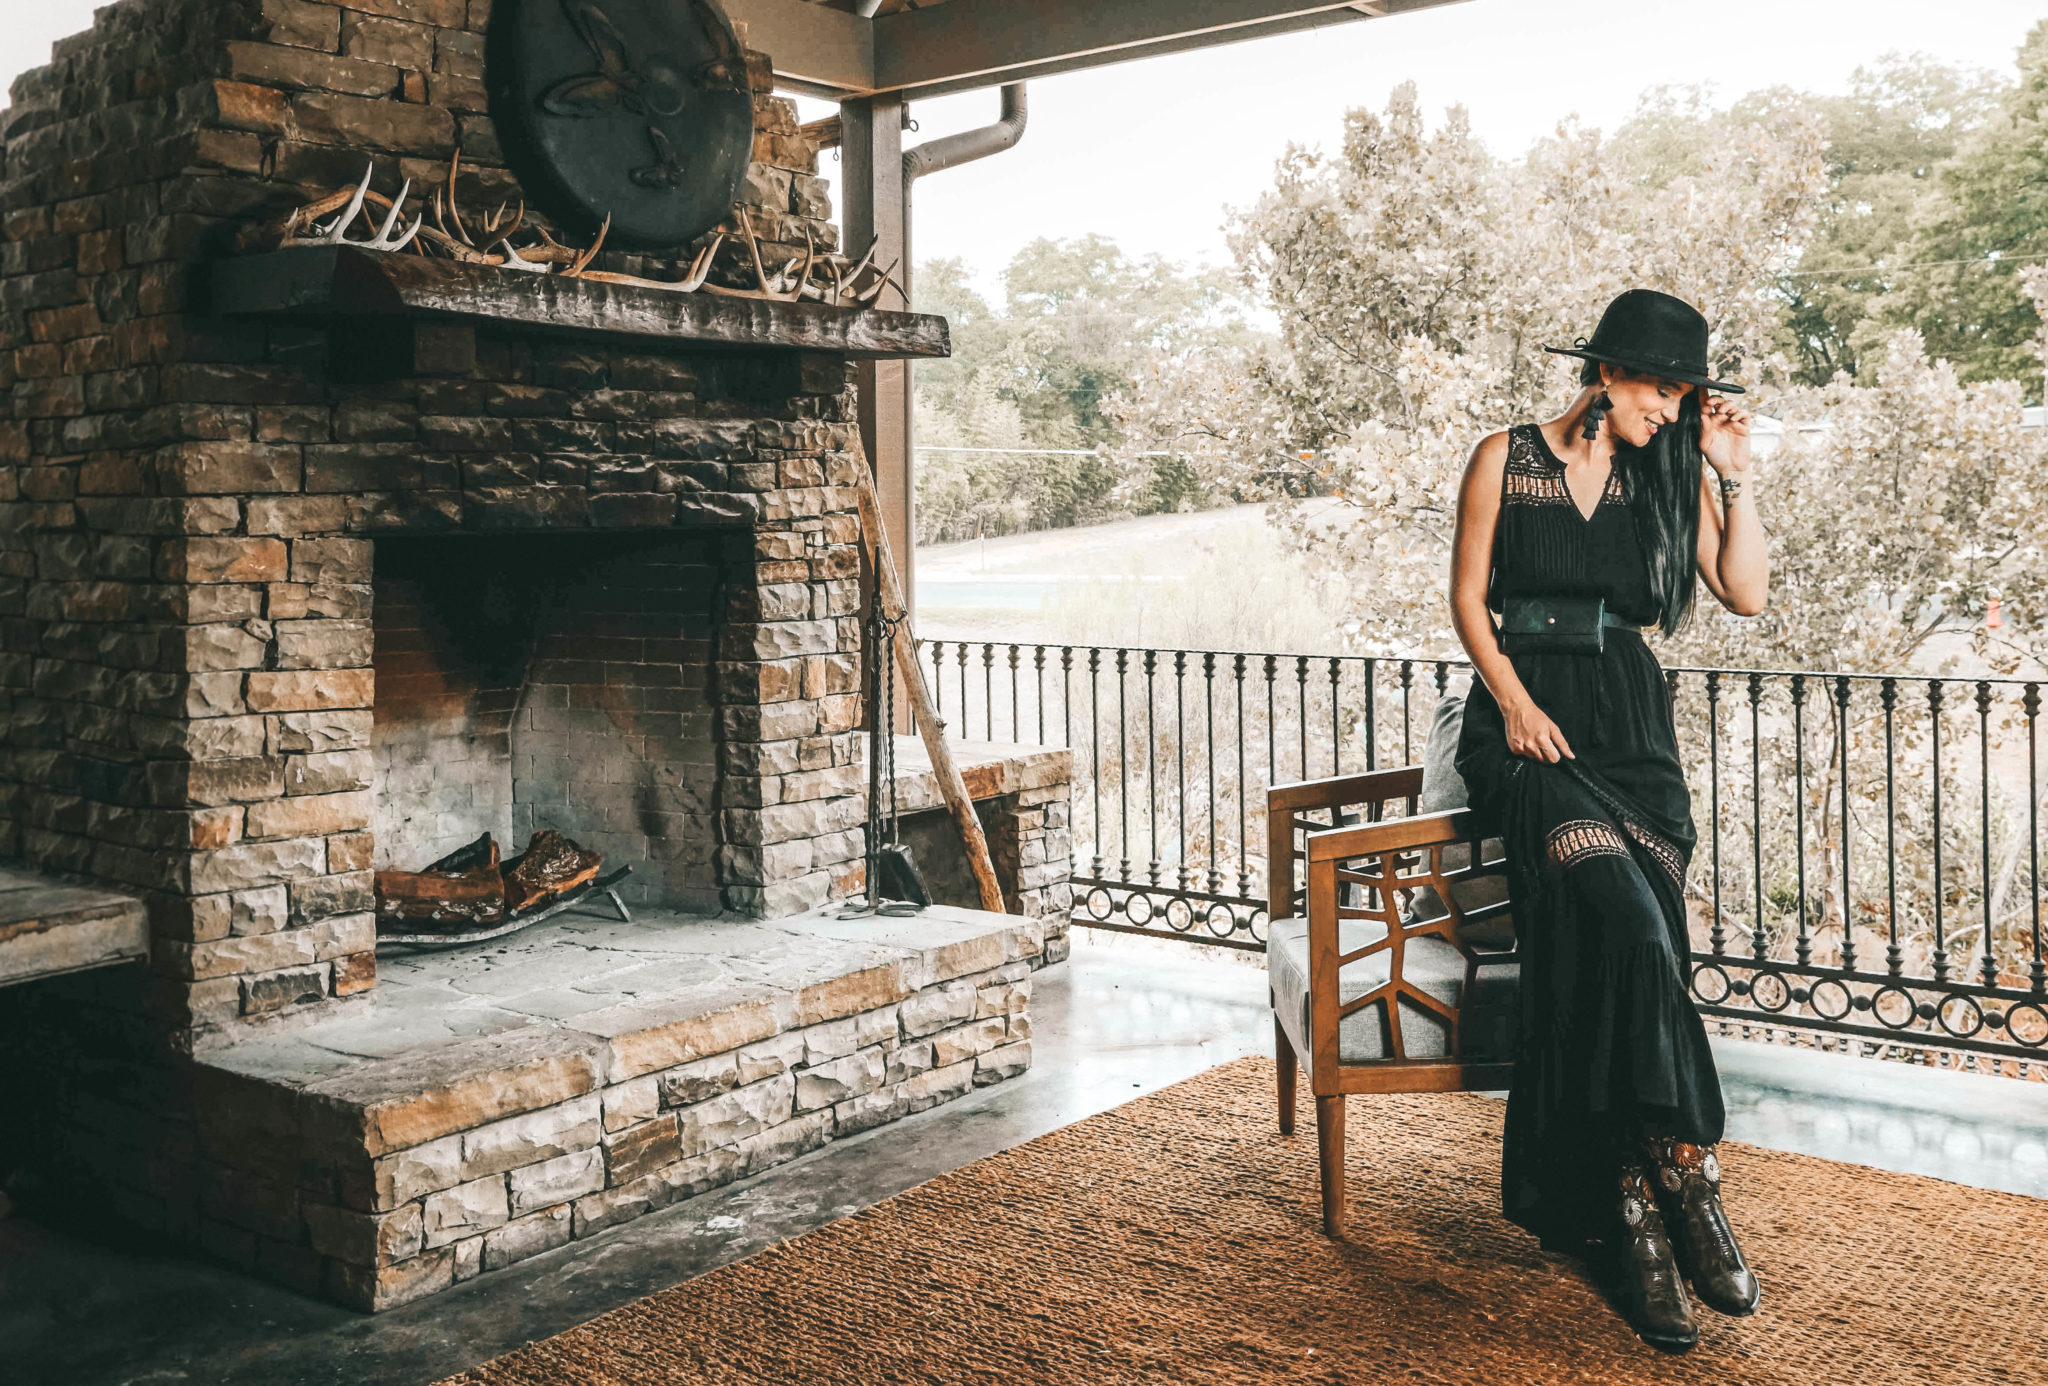 DTKAustin shares Splurge or Steal black maxi dress options that look like they came right out of West World. | high end style | affordable maxi dress | Little Black Dress | Black Maxi Dress | monique lhuillier || DTK Austin #splurgeorsteal #fashion #style #womensoutfits #gamedaylooks #dtkaustin - {Splurge or Steal - Black Lace Maxi Dress} featured by popular Austin fashion blogger Dressed to Kill